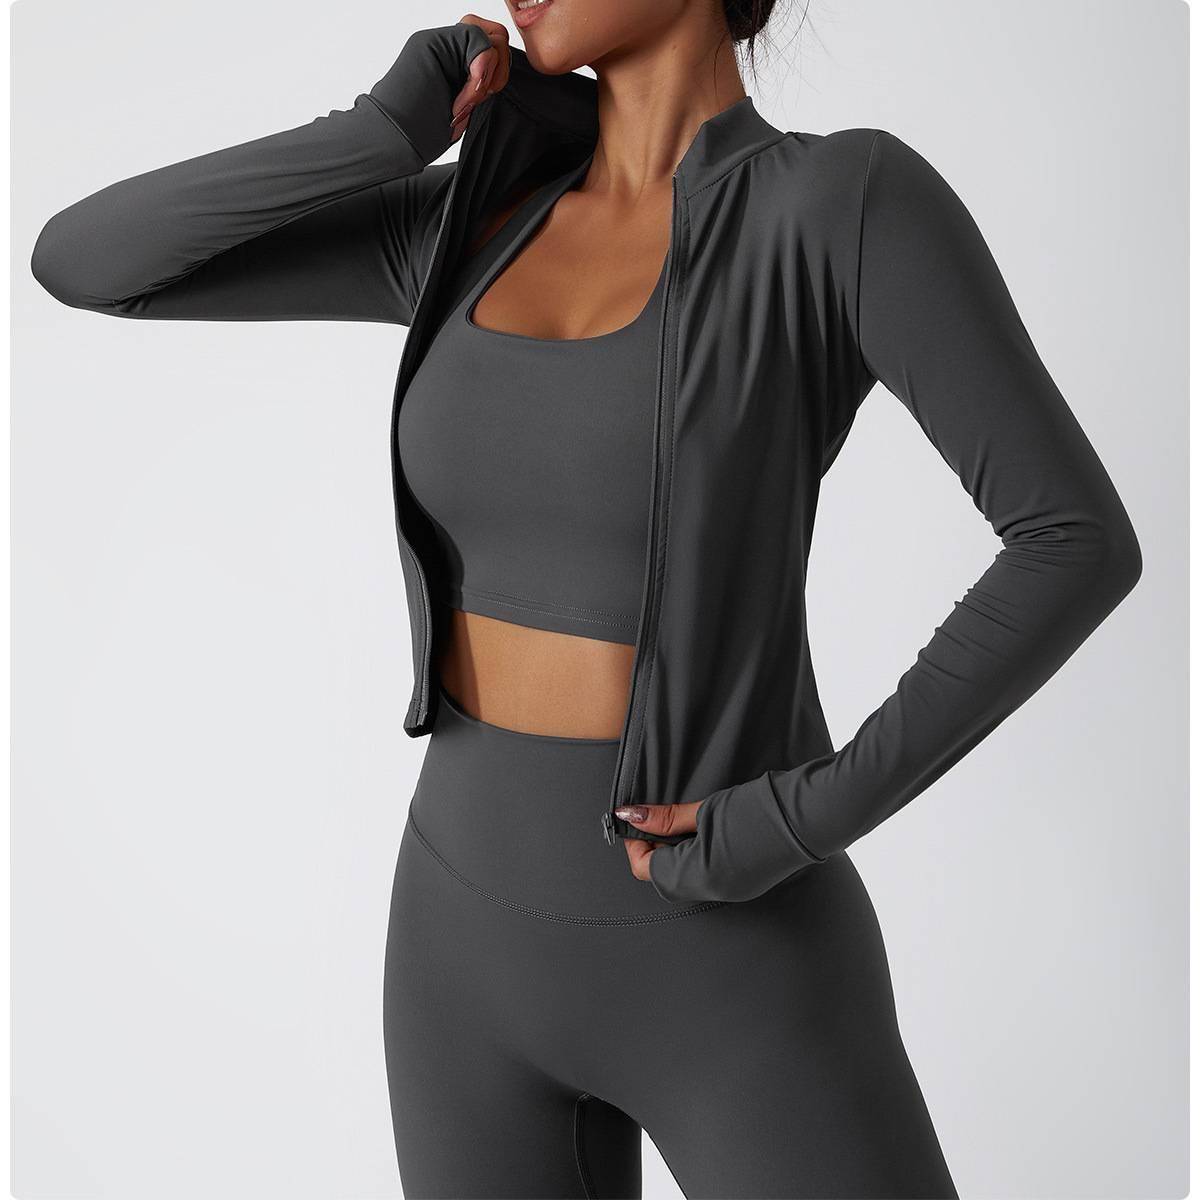 Fitness Clothes and Gym Wear Set for Women Others Size: S|L|M